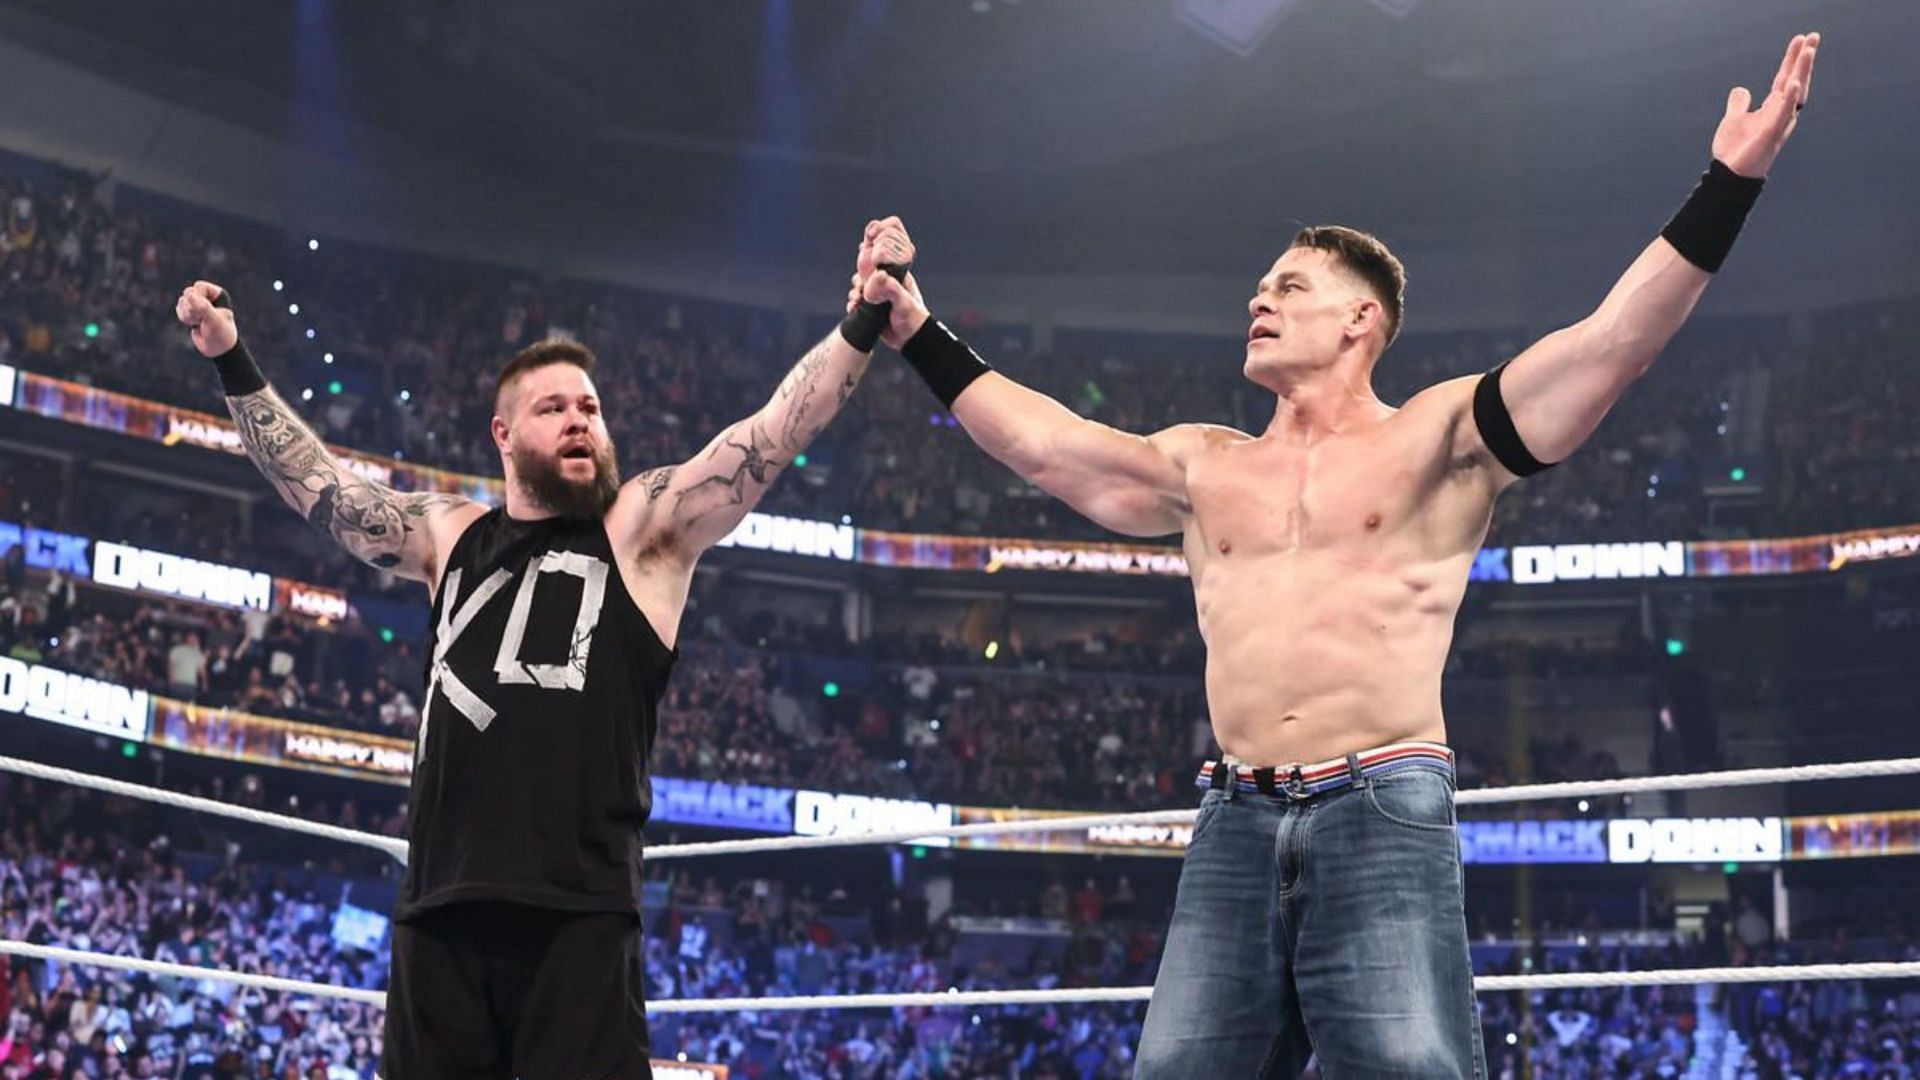 Kevin Owens and John Cena defeated Roman Reigns and Sami Zayn on WWE SmackDown